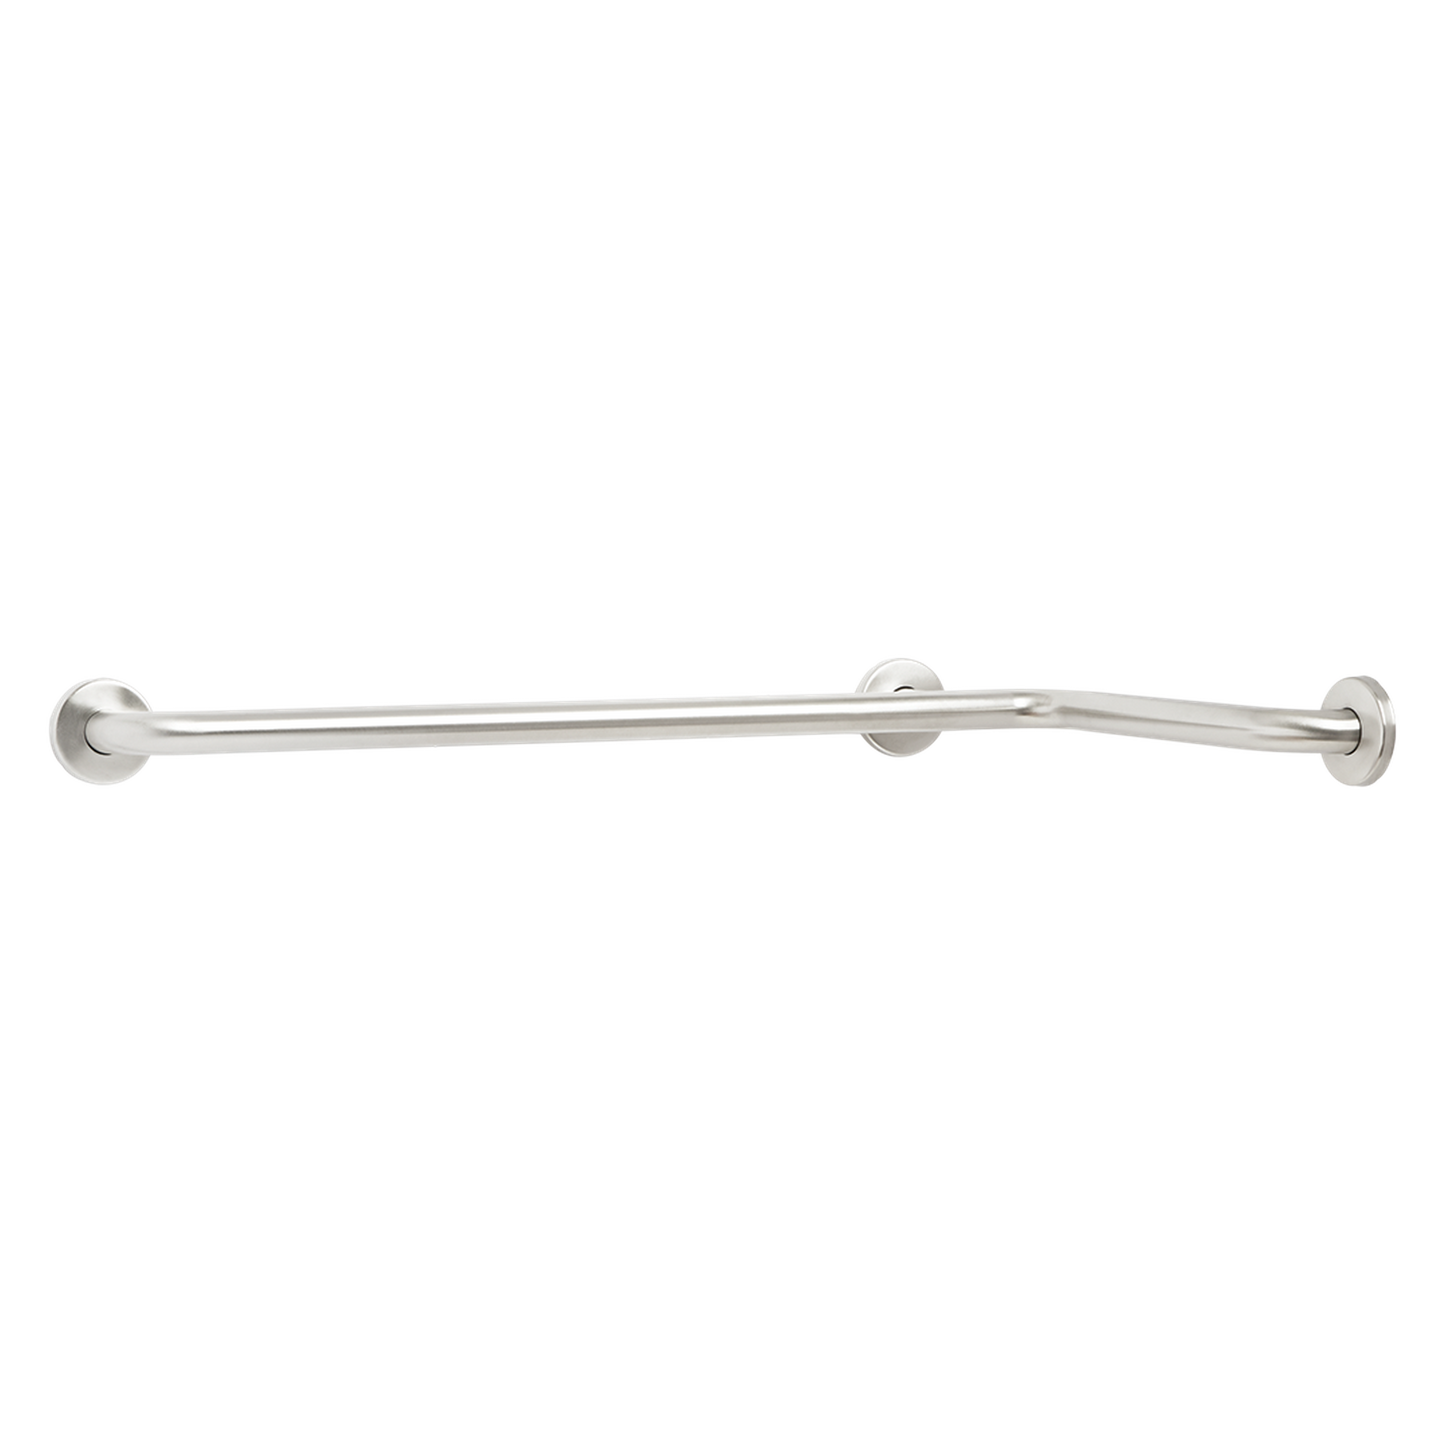 Seachrome Signature Series 24" x 24" Satin Stainless Steel 1.25" Bar Diameter Exposed Flange Curved Tub and Shower Grab Bar